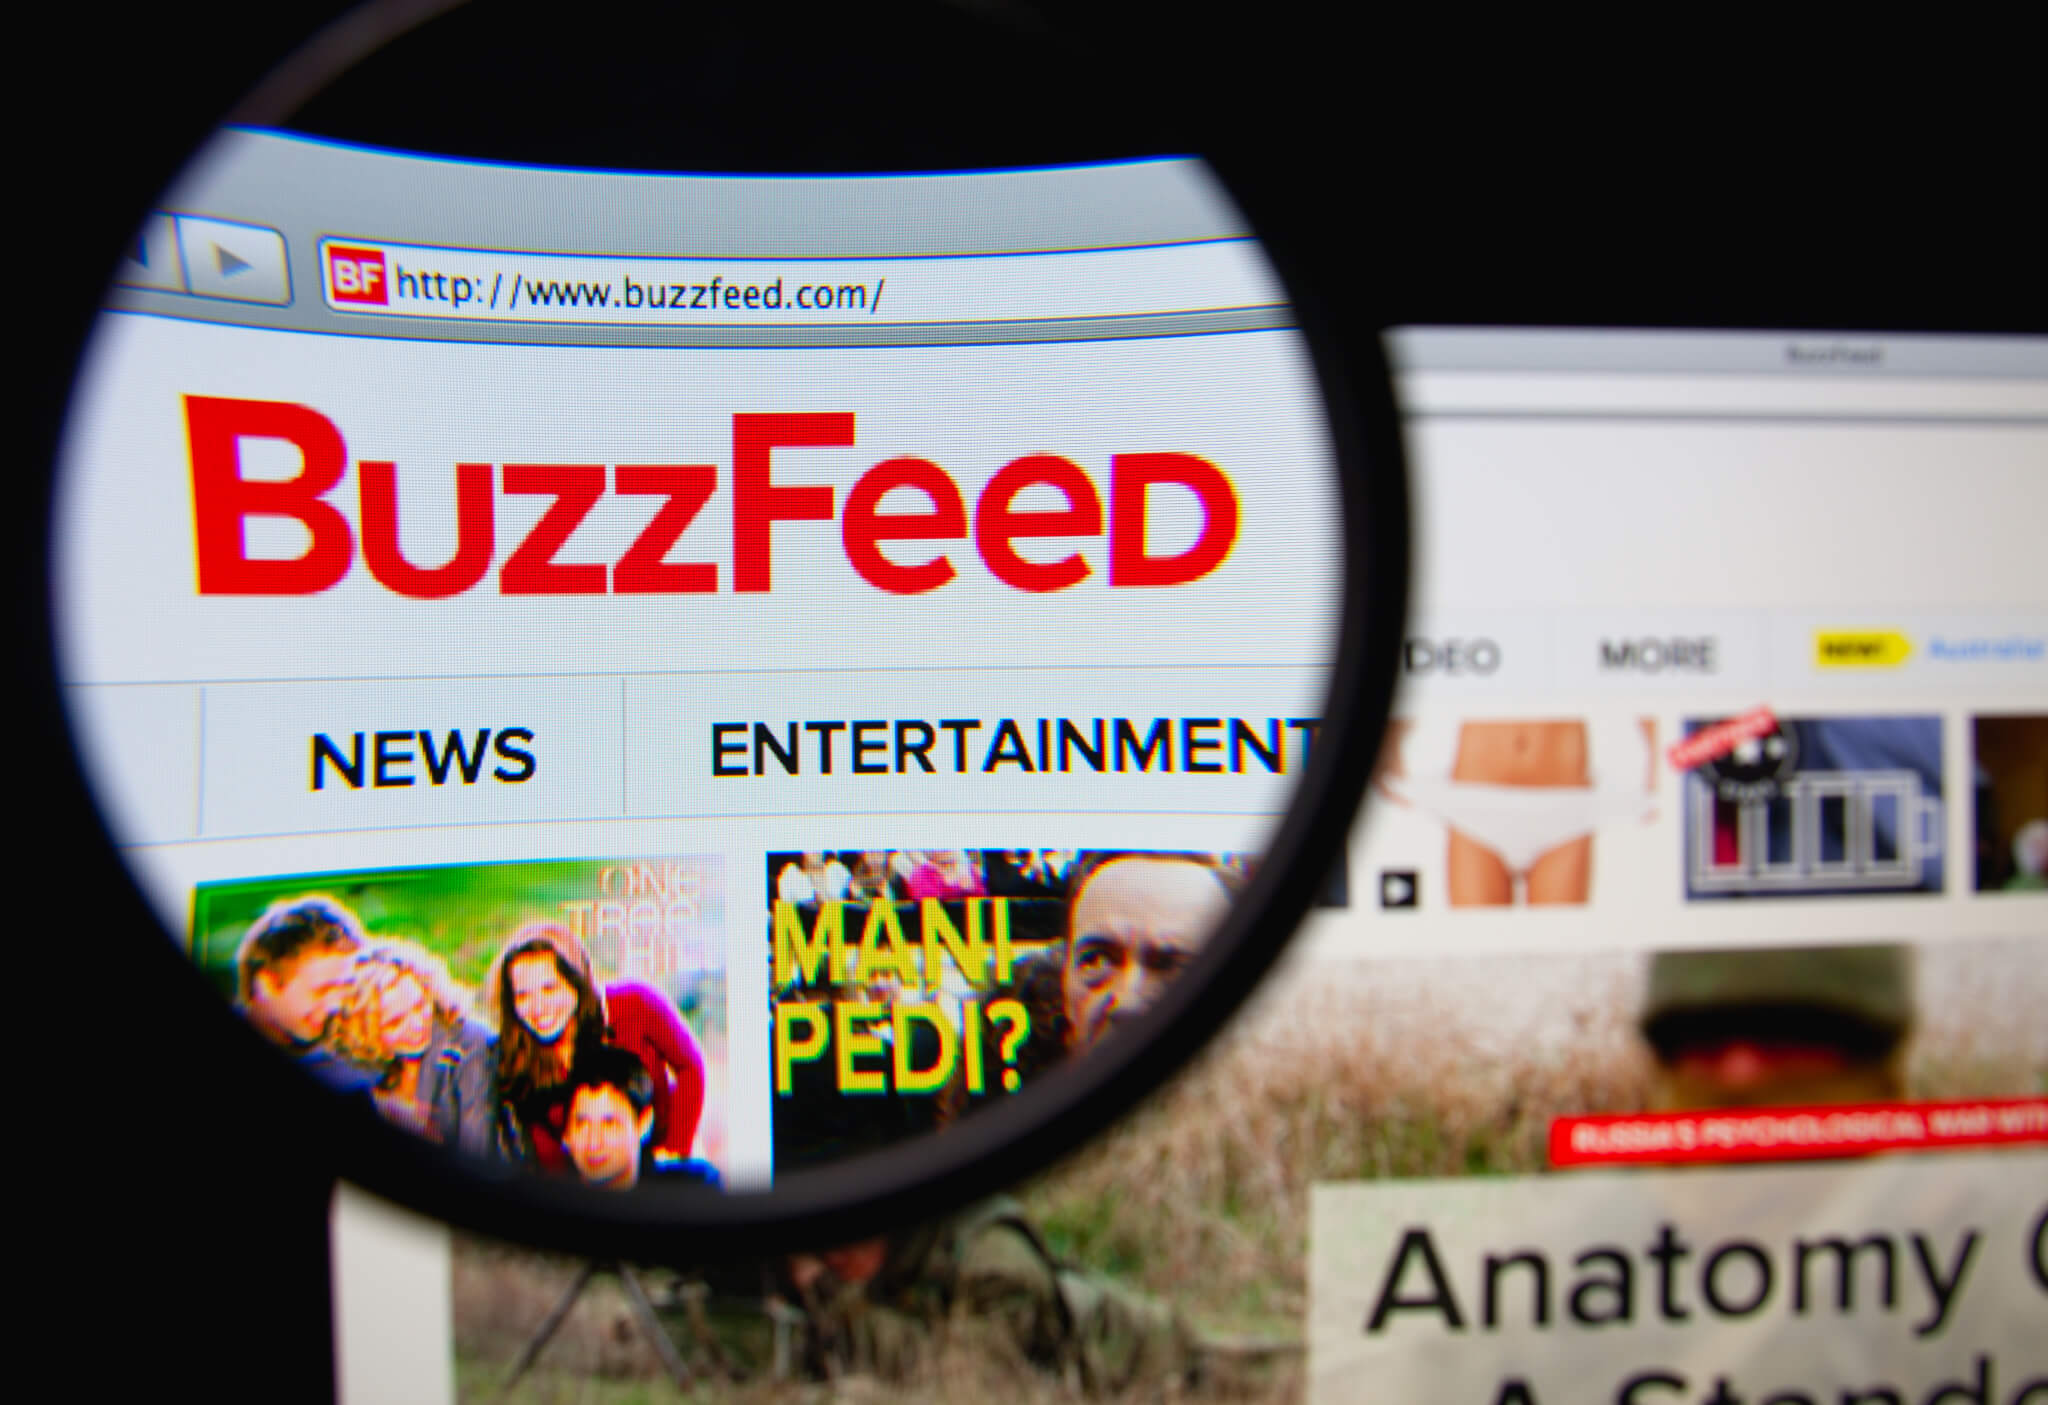 Buzzfeed is an entertainment and news media company